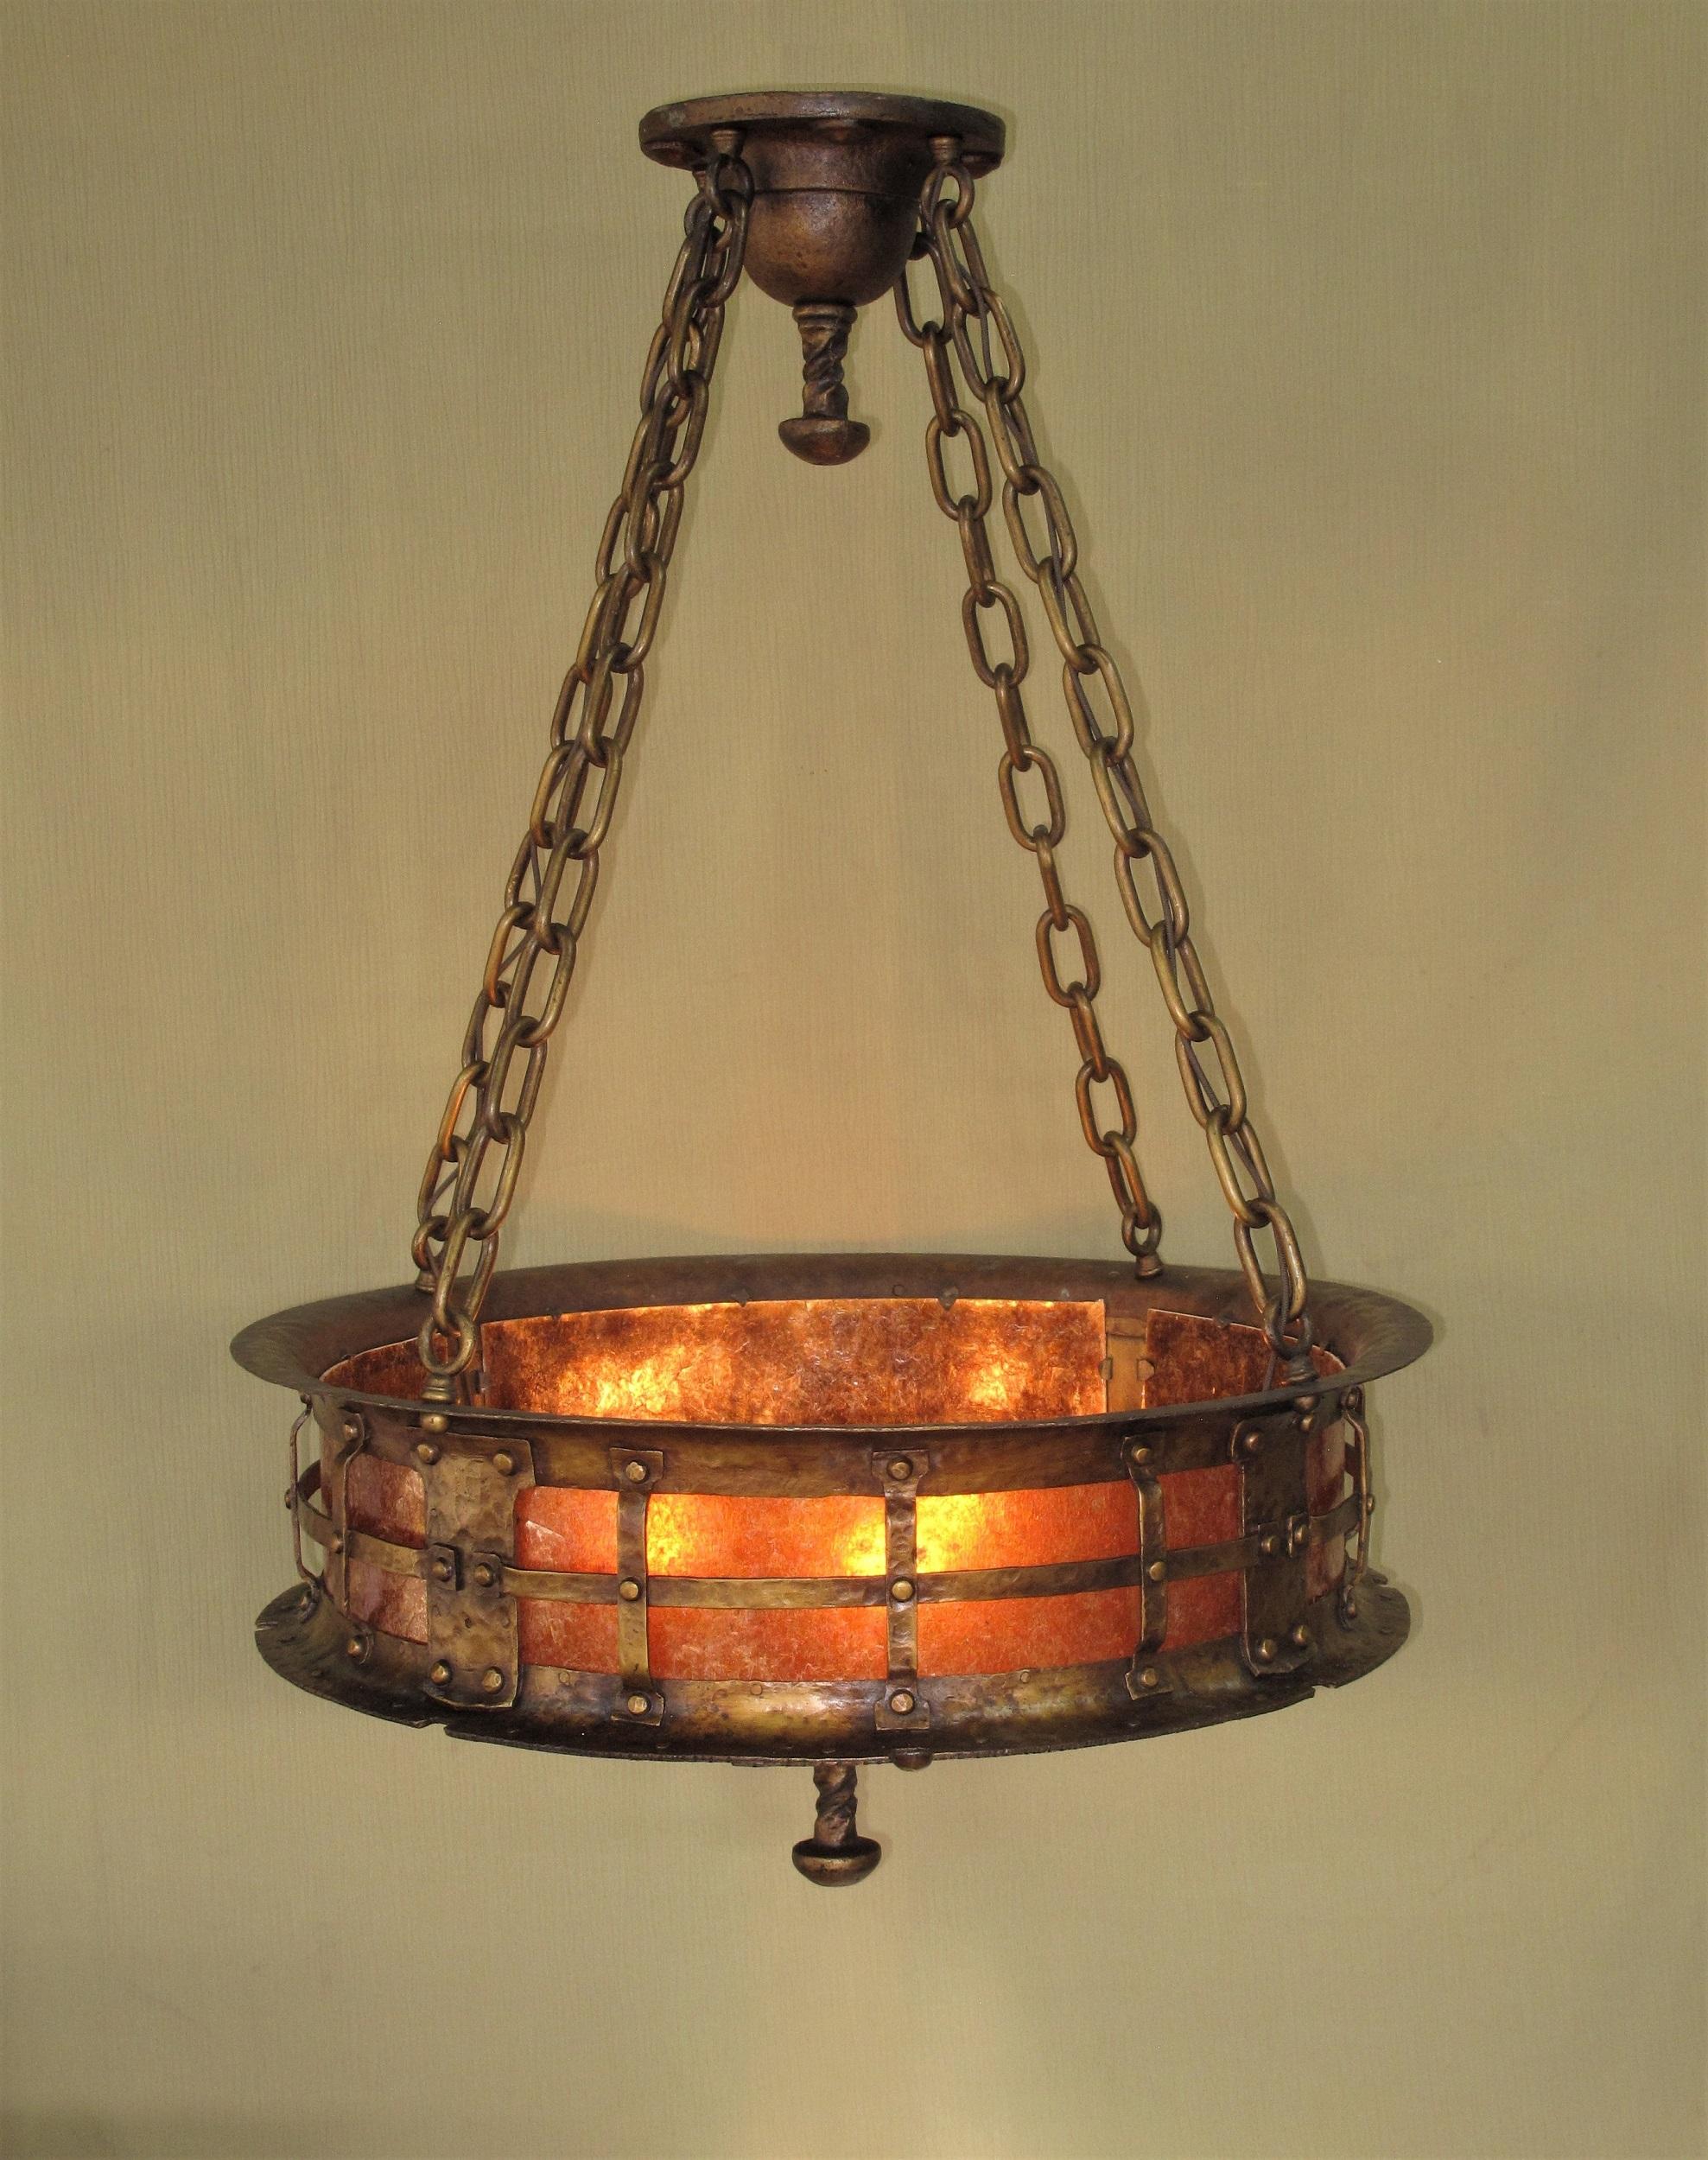 American Craftsman c.1916 Massive Craftsman Fixture all Hand Wrought Original Finish Two Available  For Sale